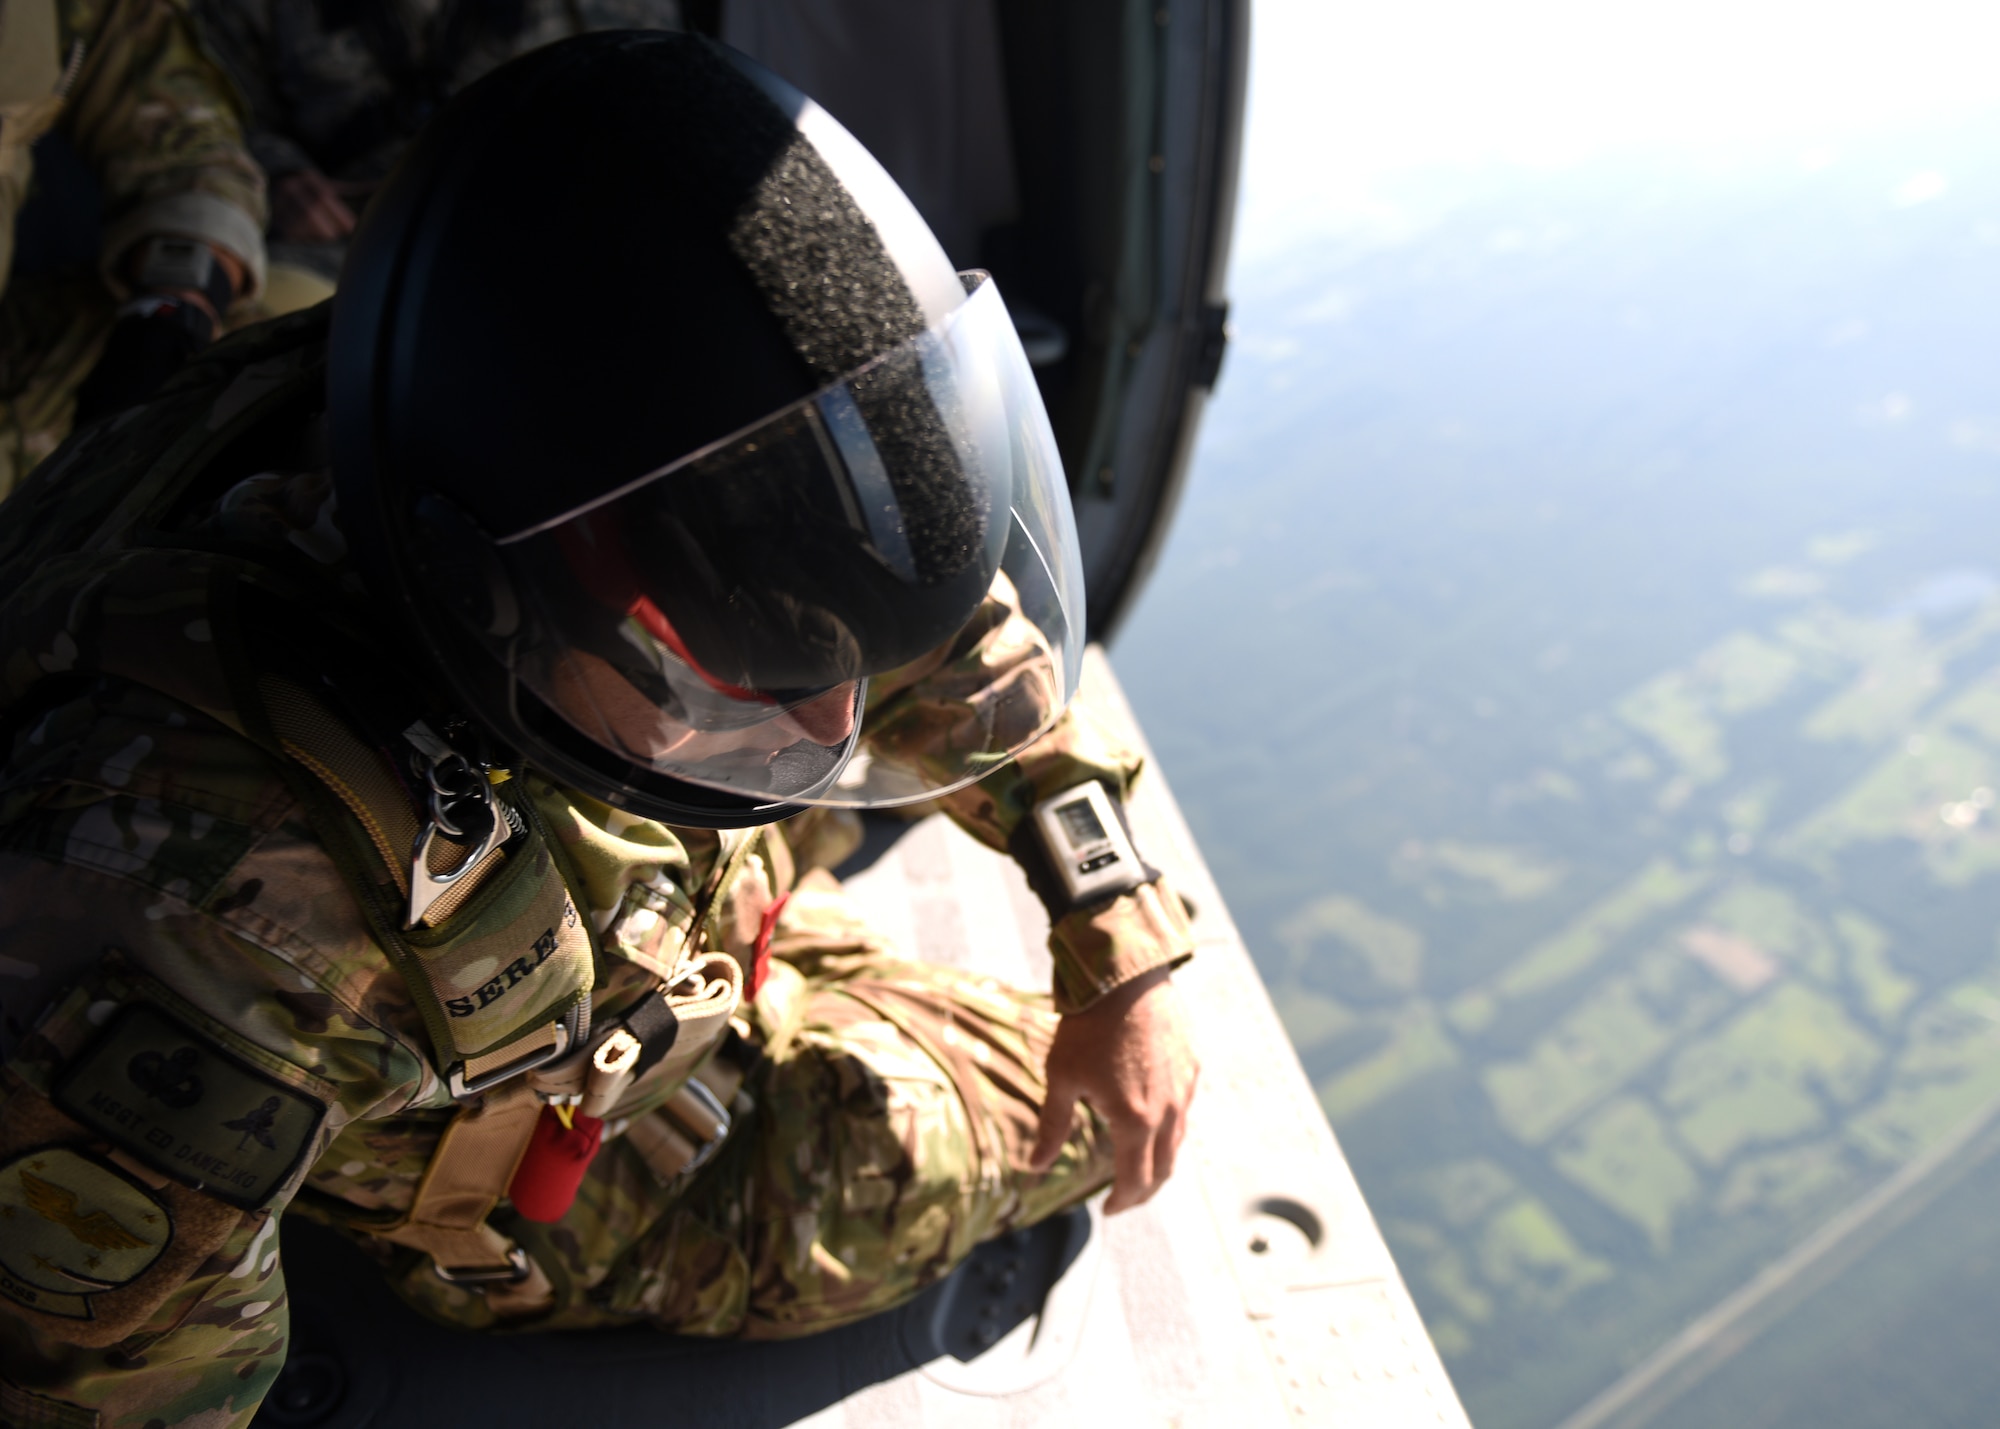 People in uniform perform and prepare for freefall jumps.